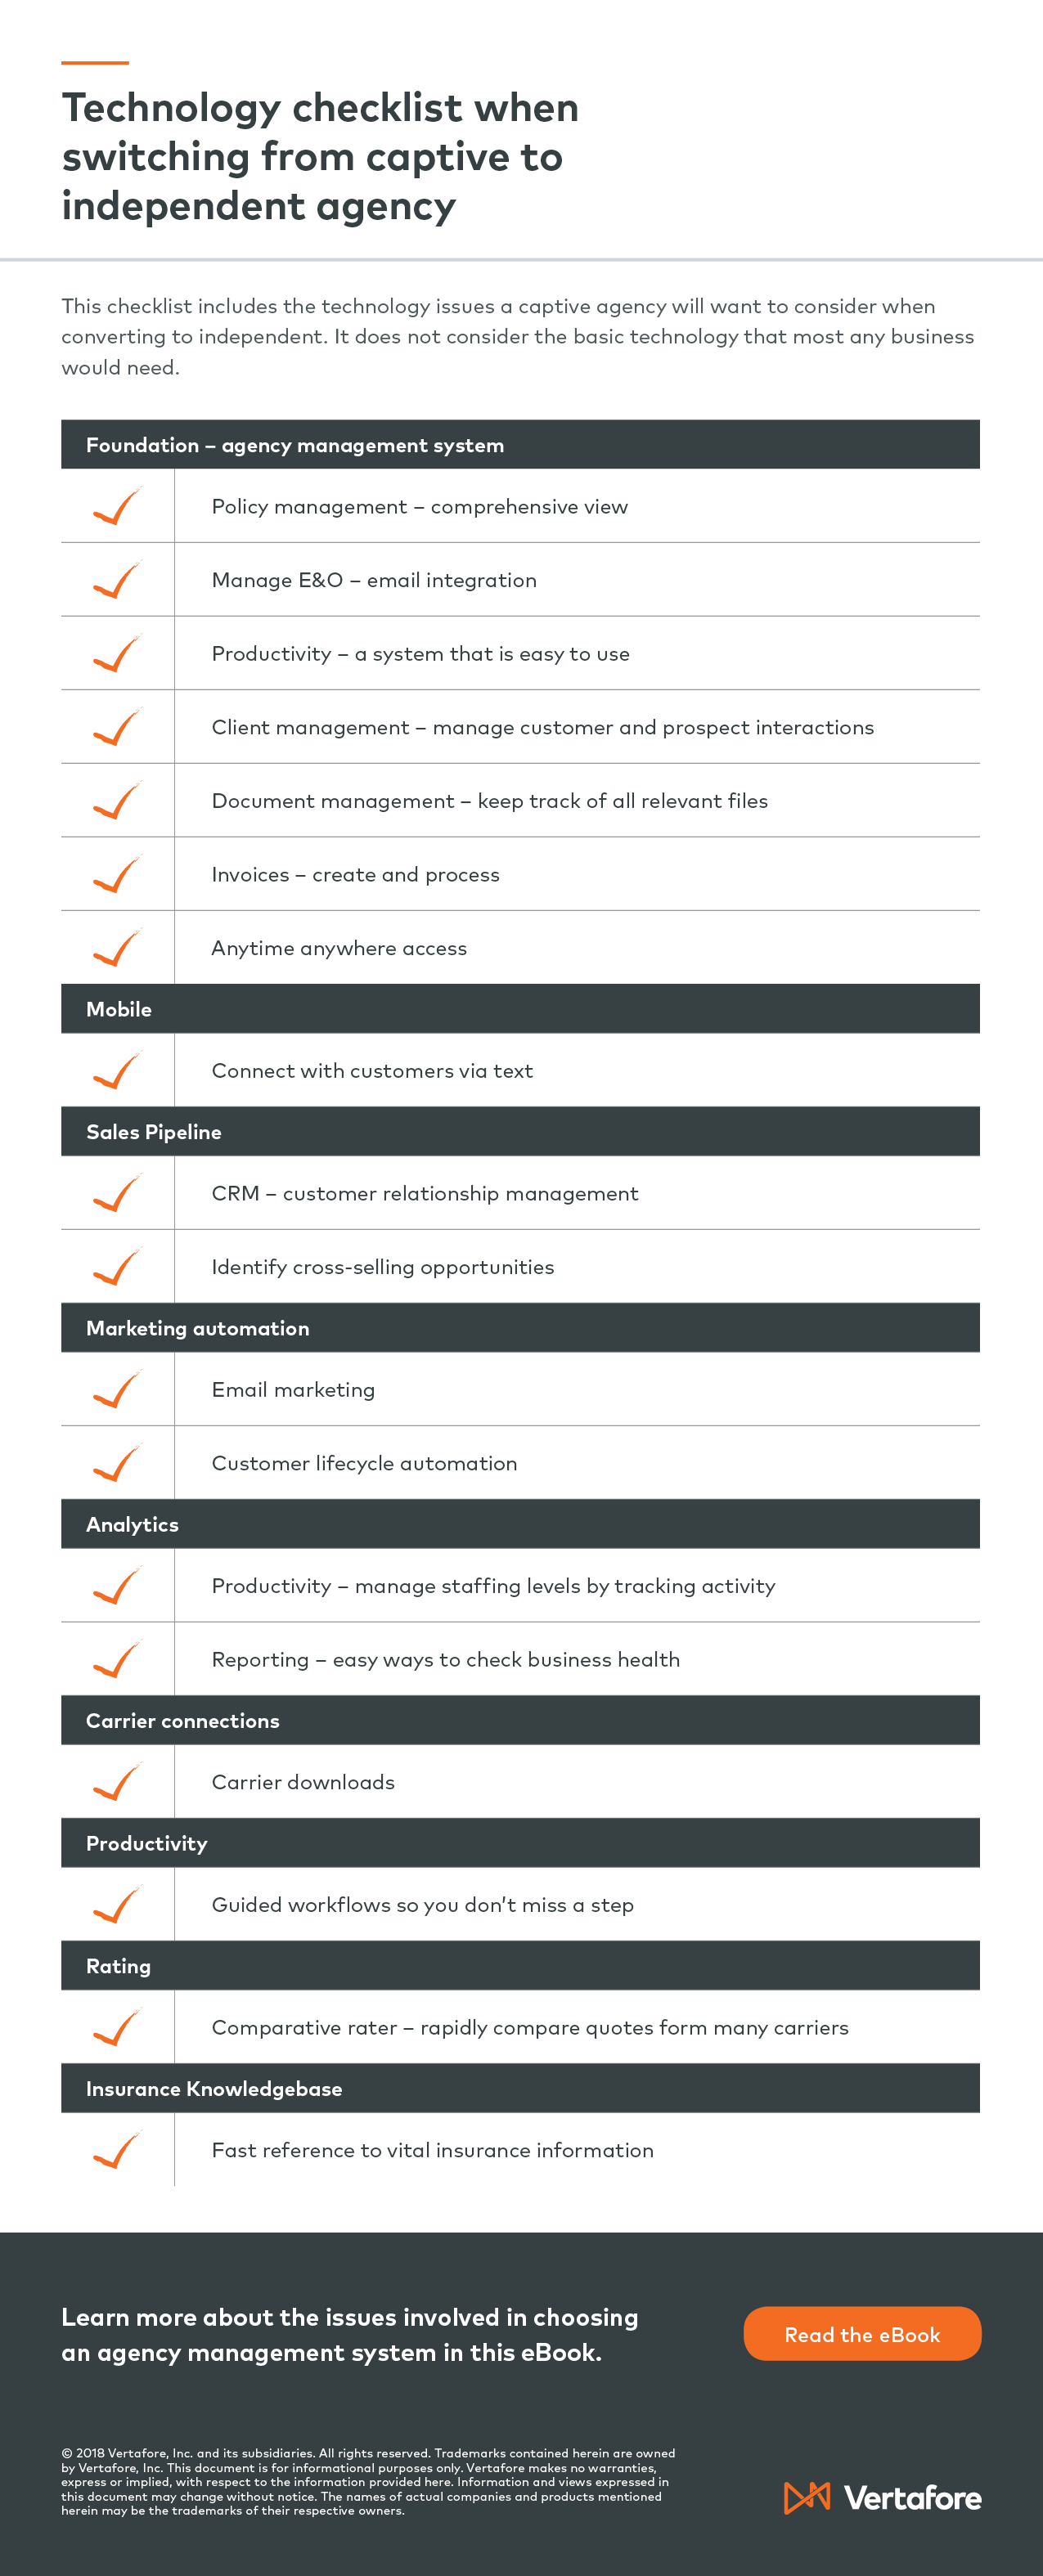 Technology checklist when switching from captive to independent agency